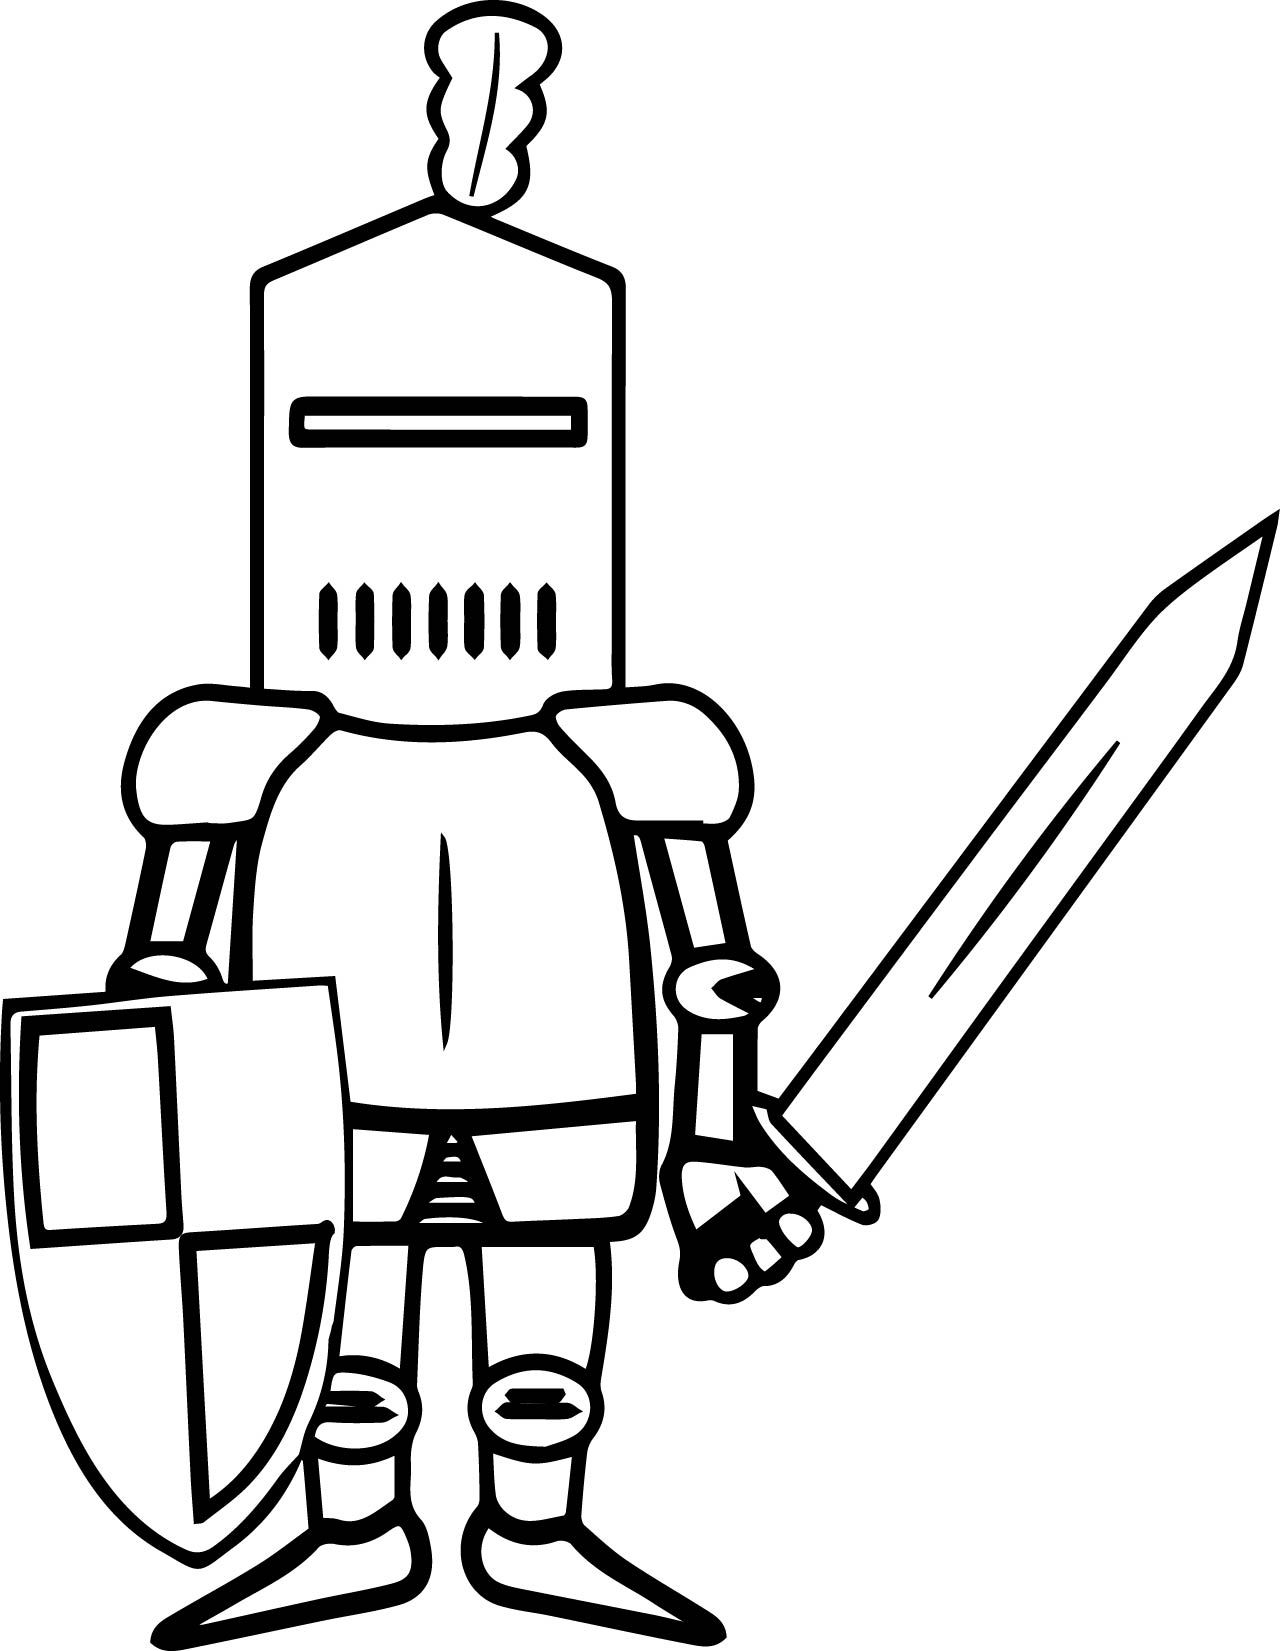 Swords Coloring Pages - Coloring Home